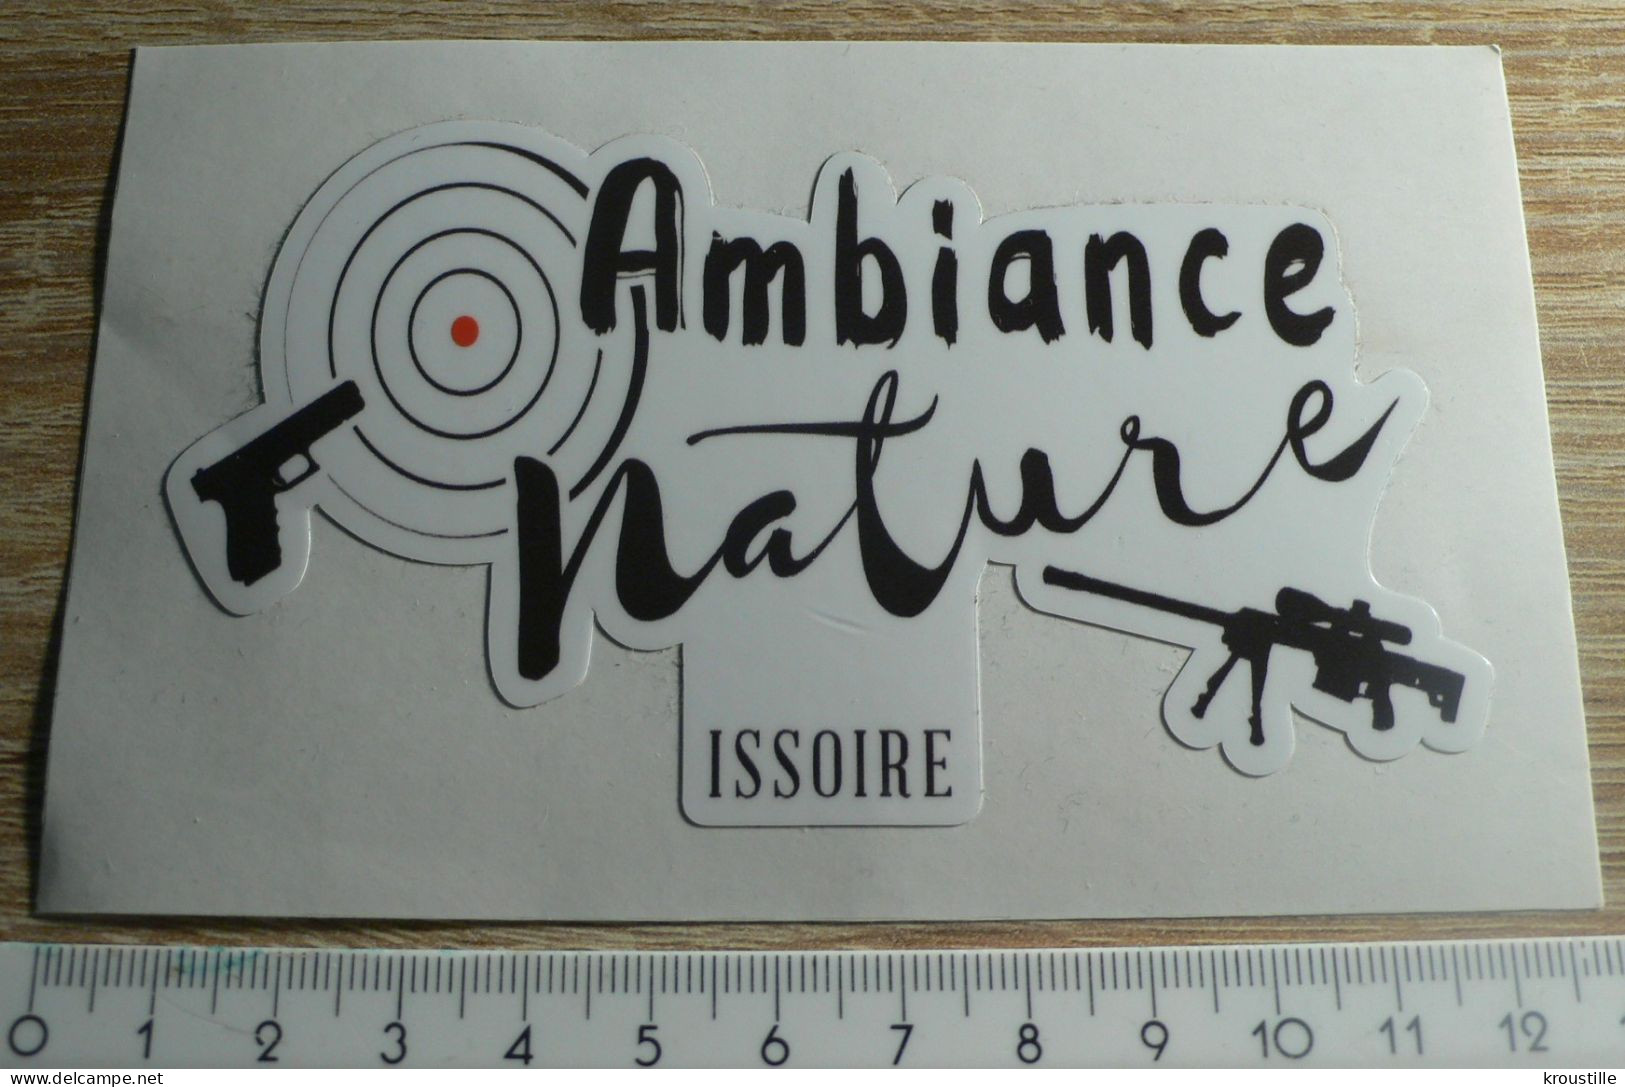 THEME TIR : AUTOCOLLANT AMBIANCE NATURE ISSOIRE - Stickers